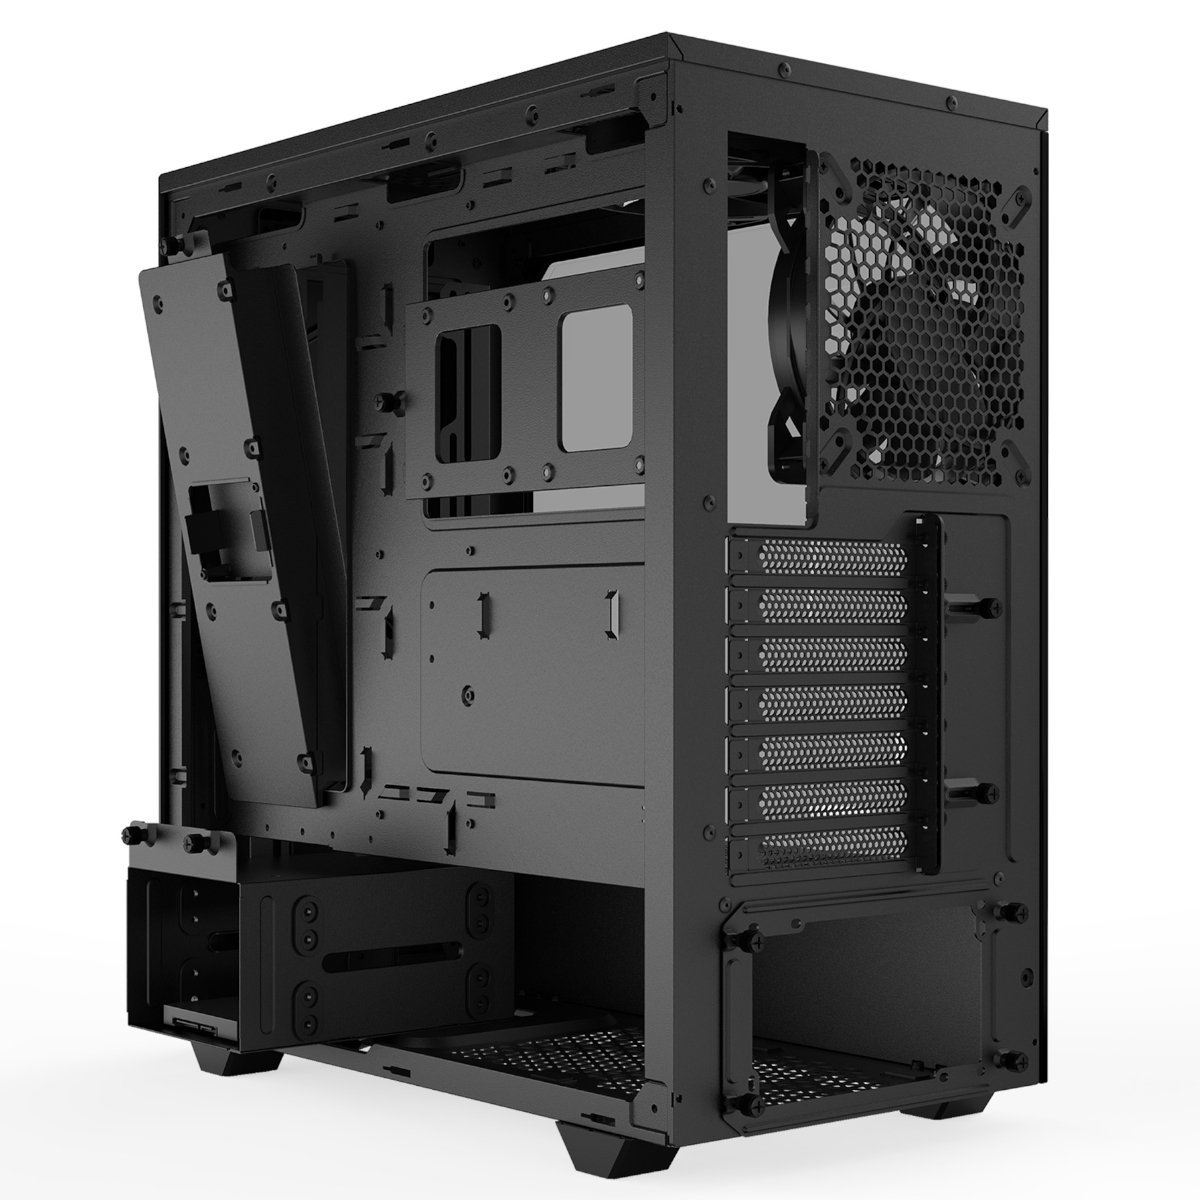 be quiet! - be quiet! Pure Base 500DX ARGB Midi Tower Case - Black Tempered Glass